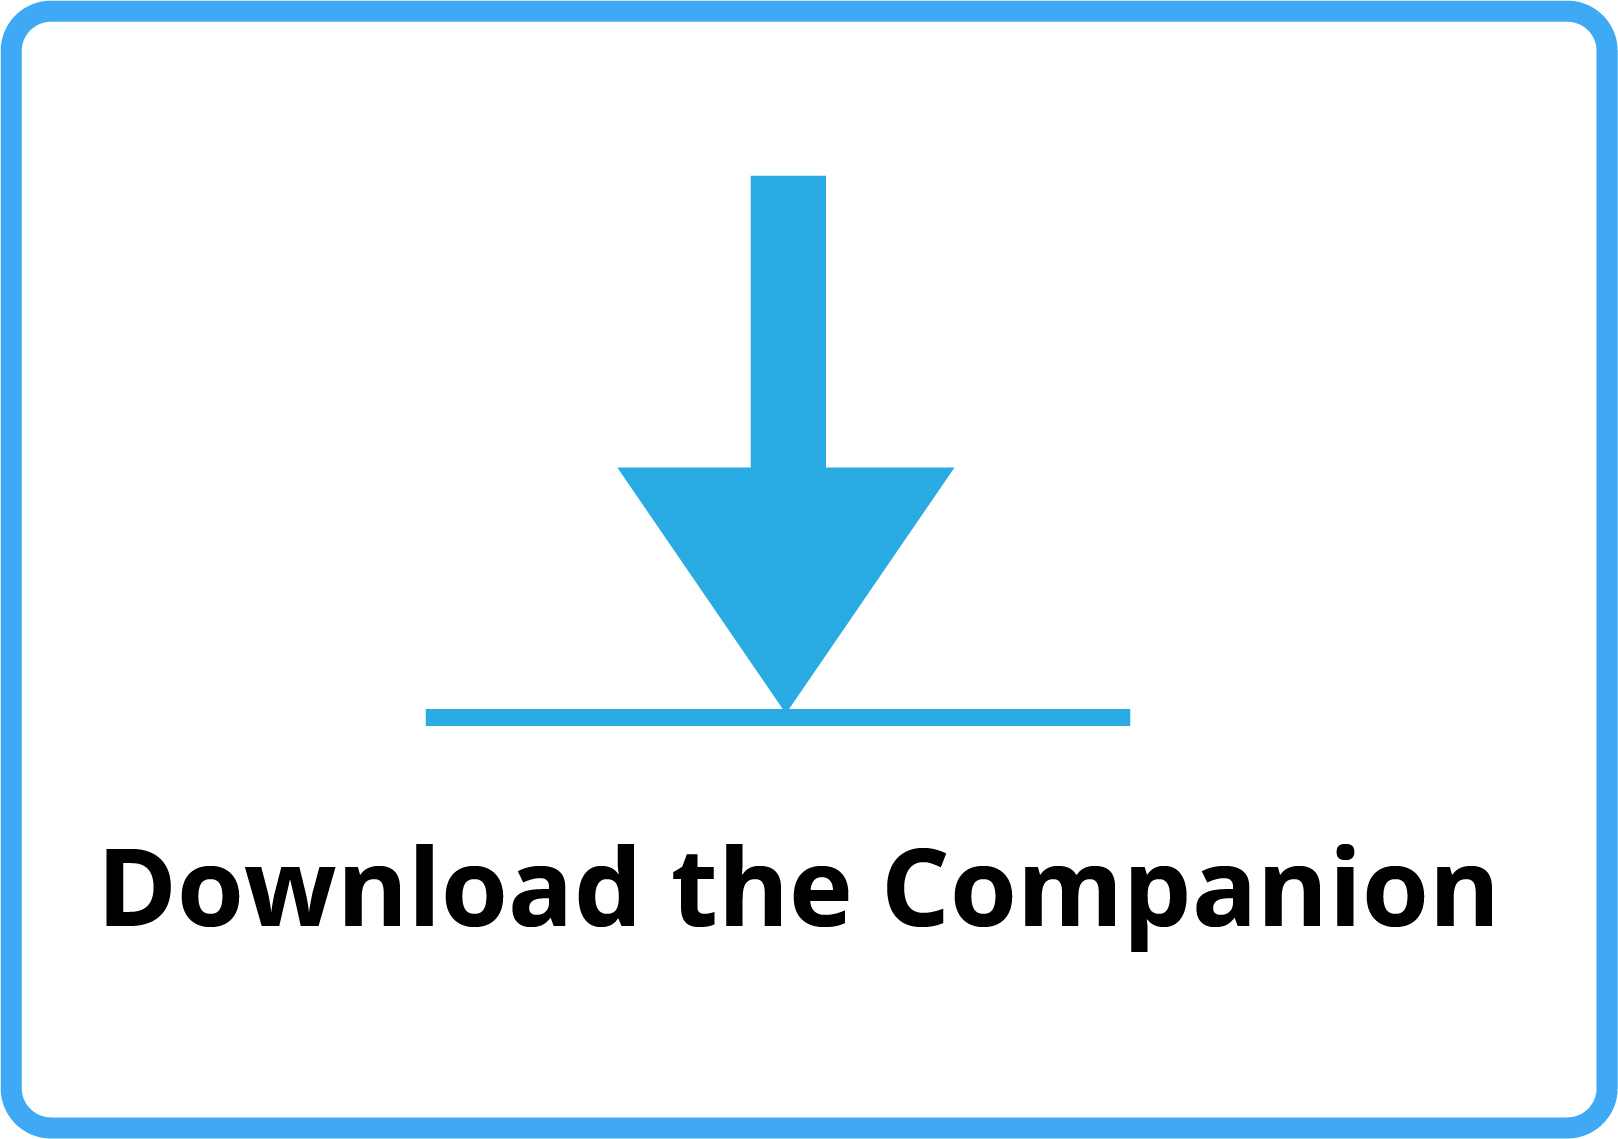 Image of download icon with text Download Companion